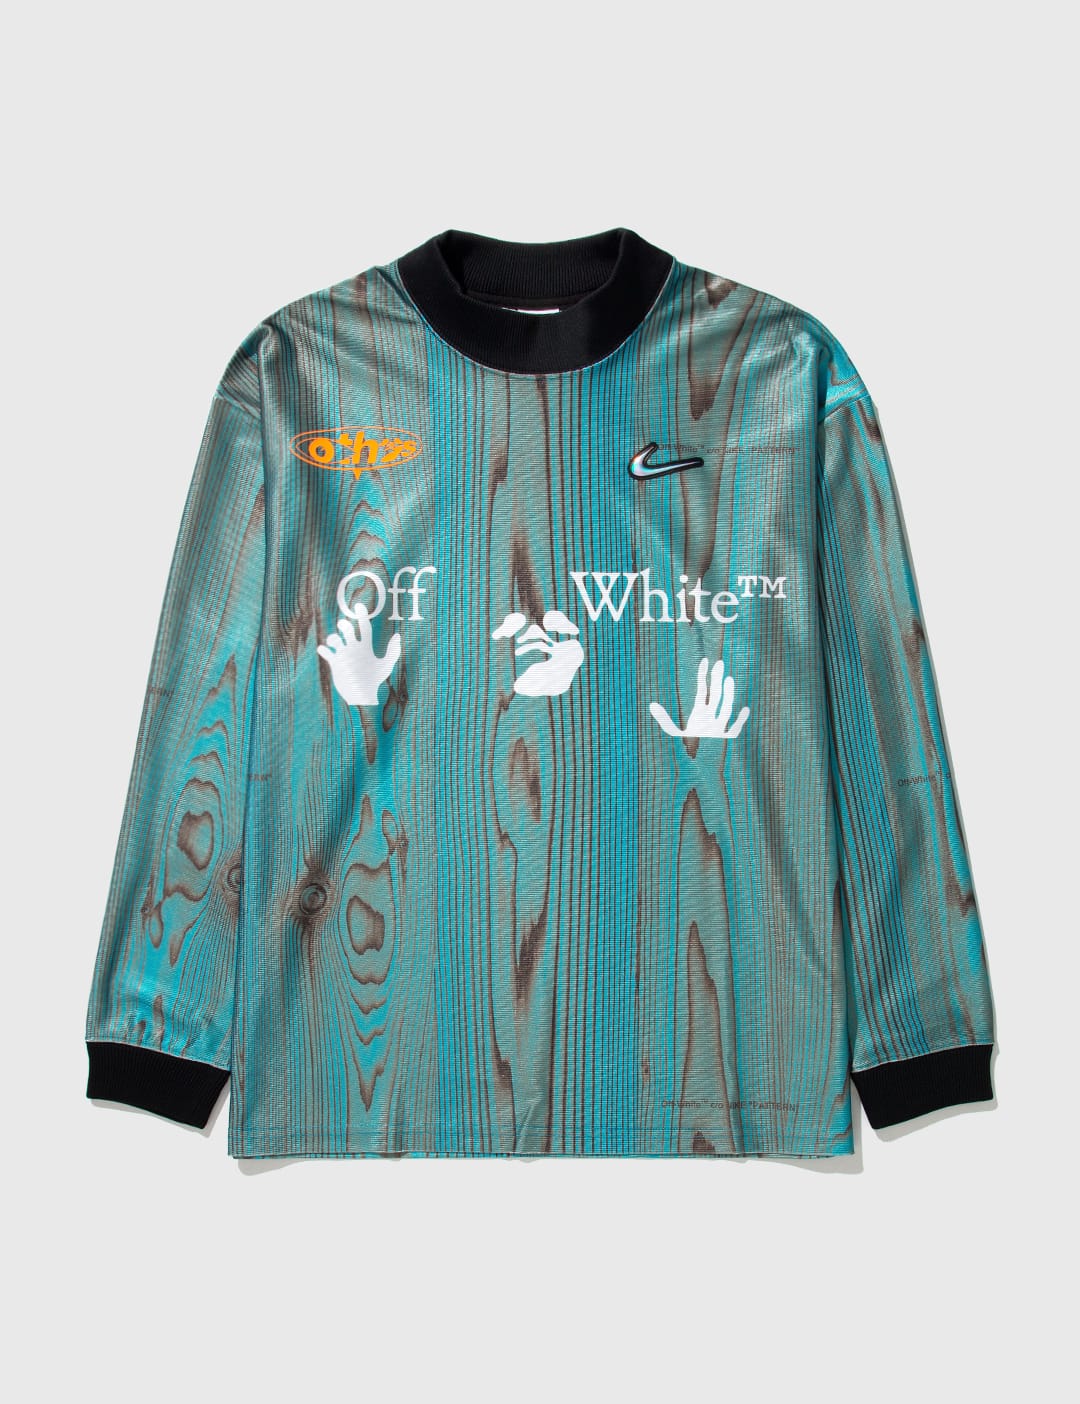 Nike - Nike x Off-White™ NRG Jersey | HBX - Globally Curated